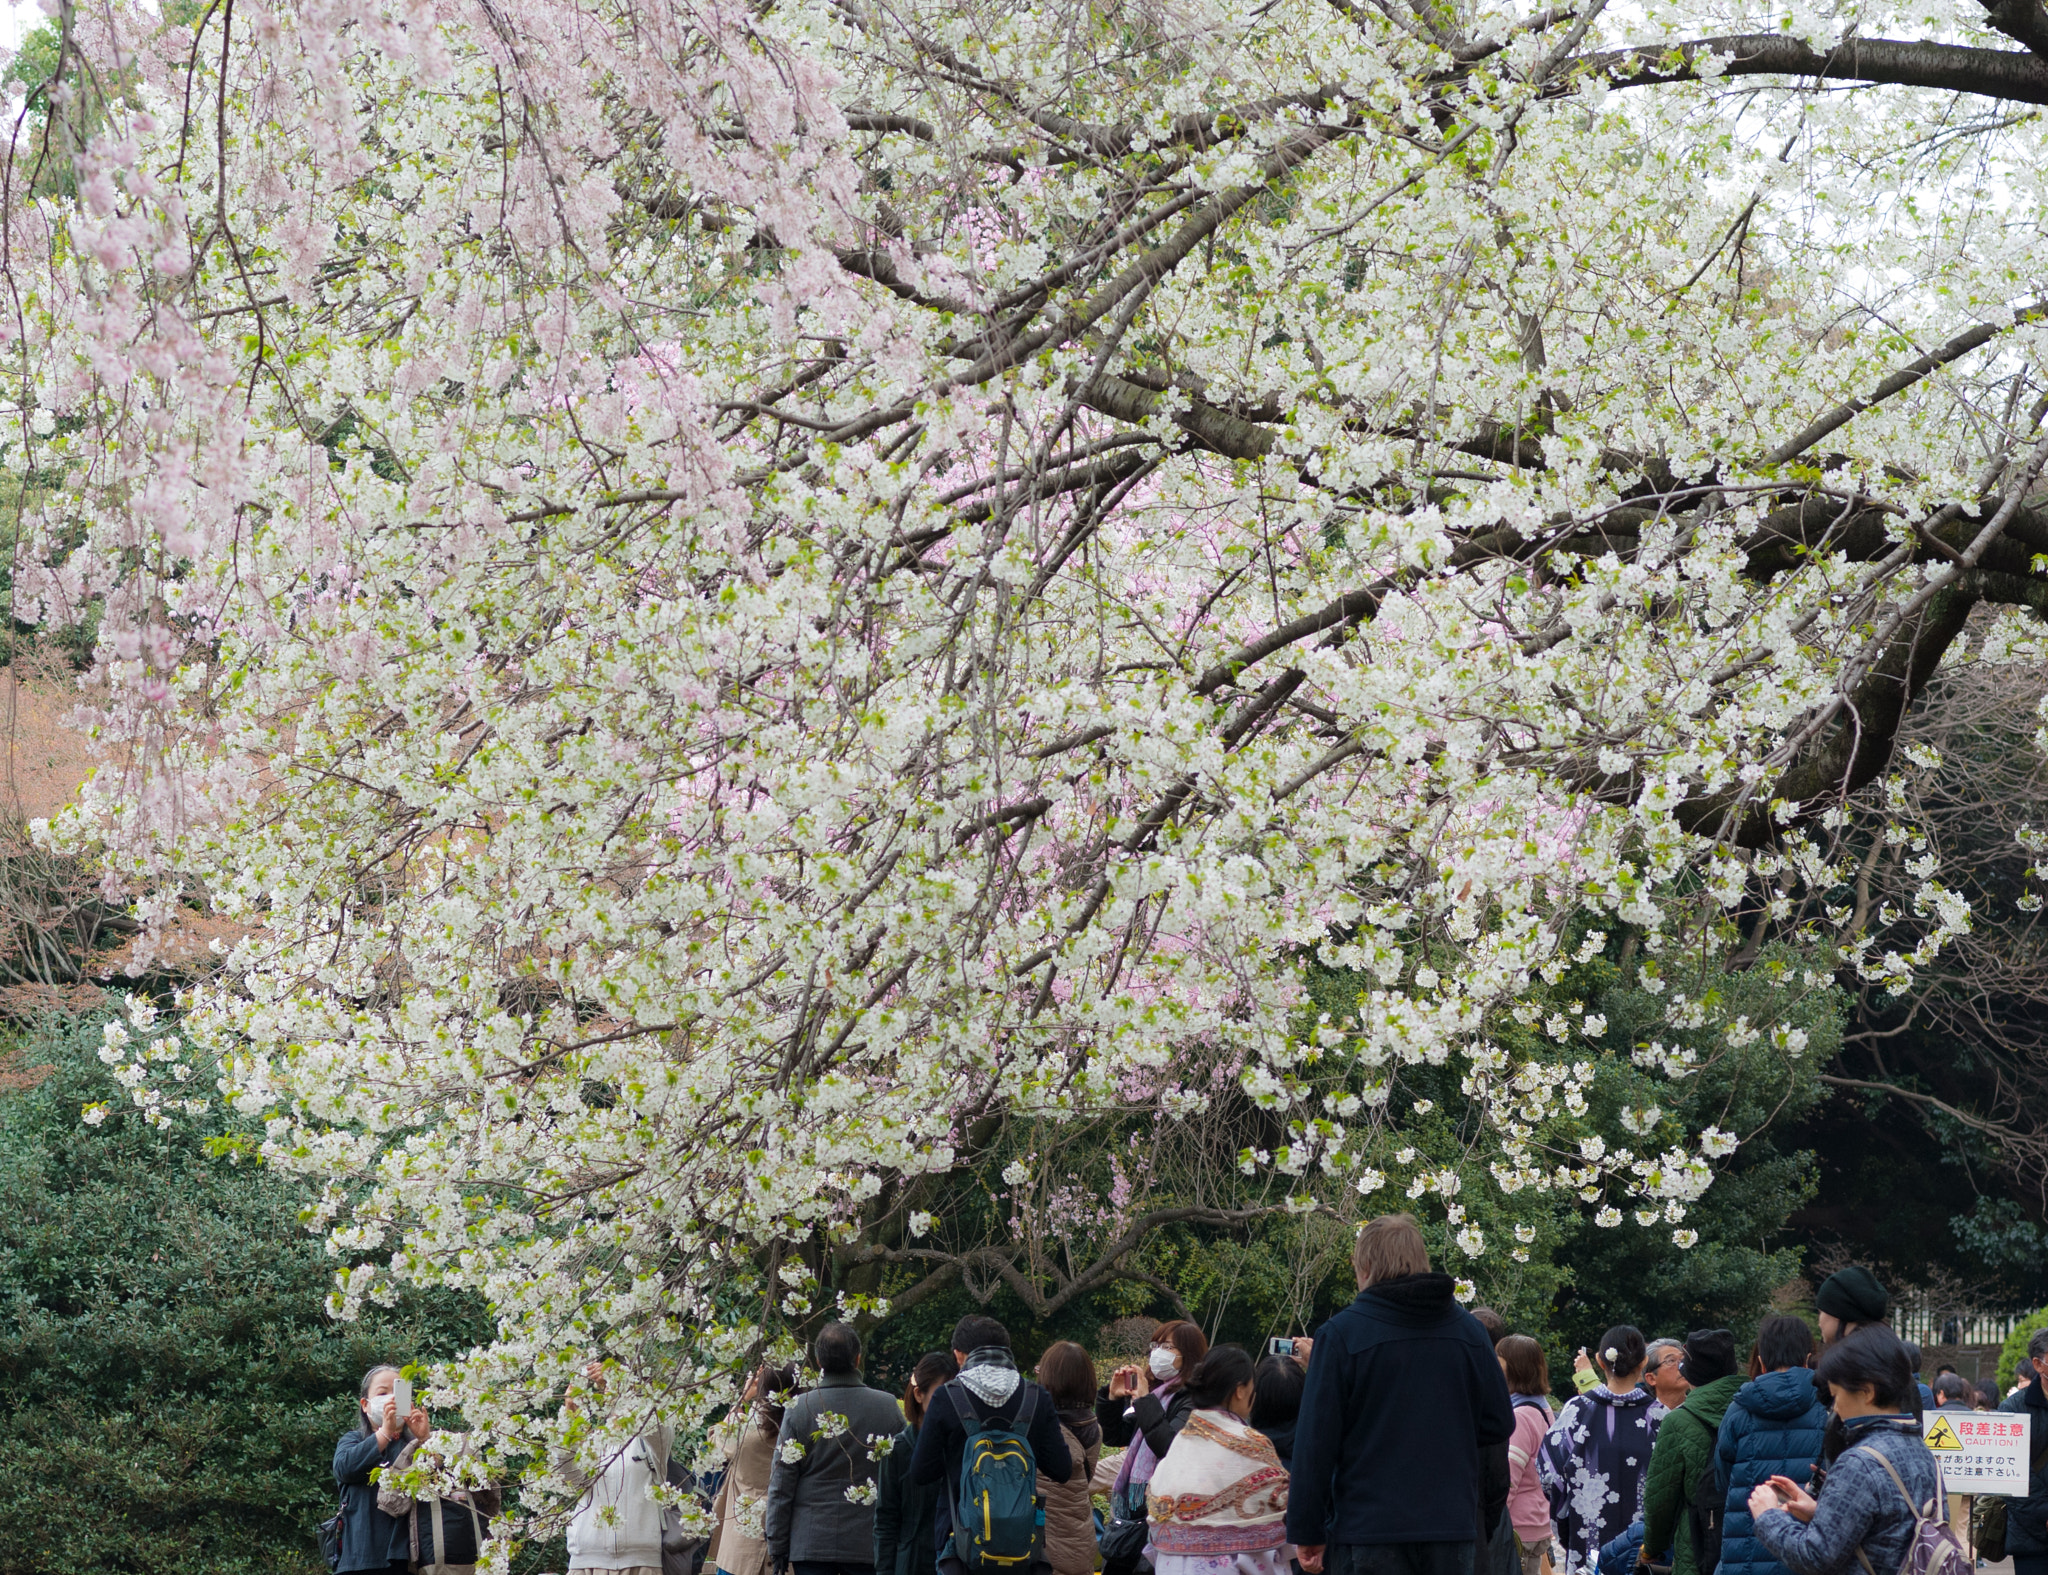 Pentax K200D sample photo. The cherry blossoms photography